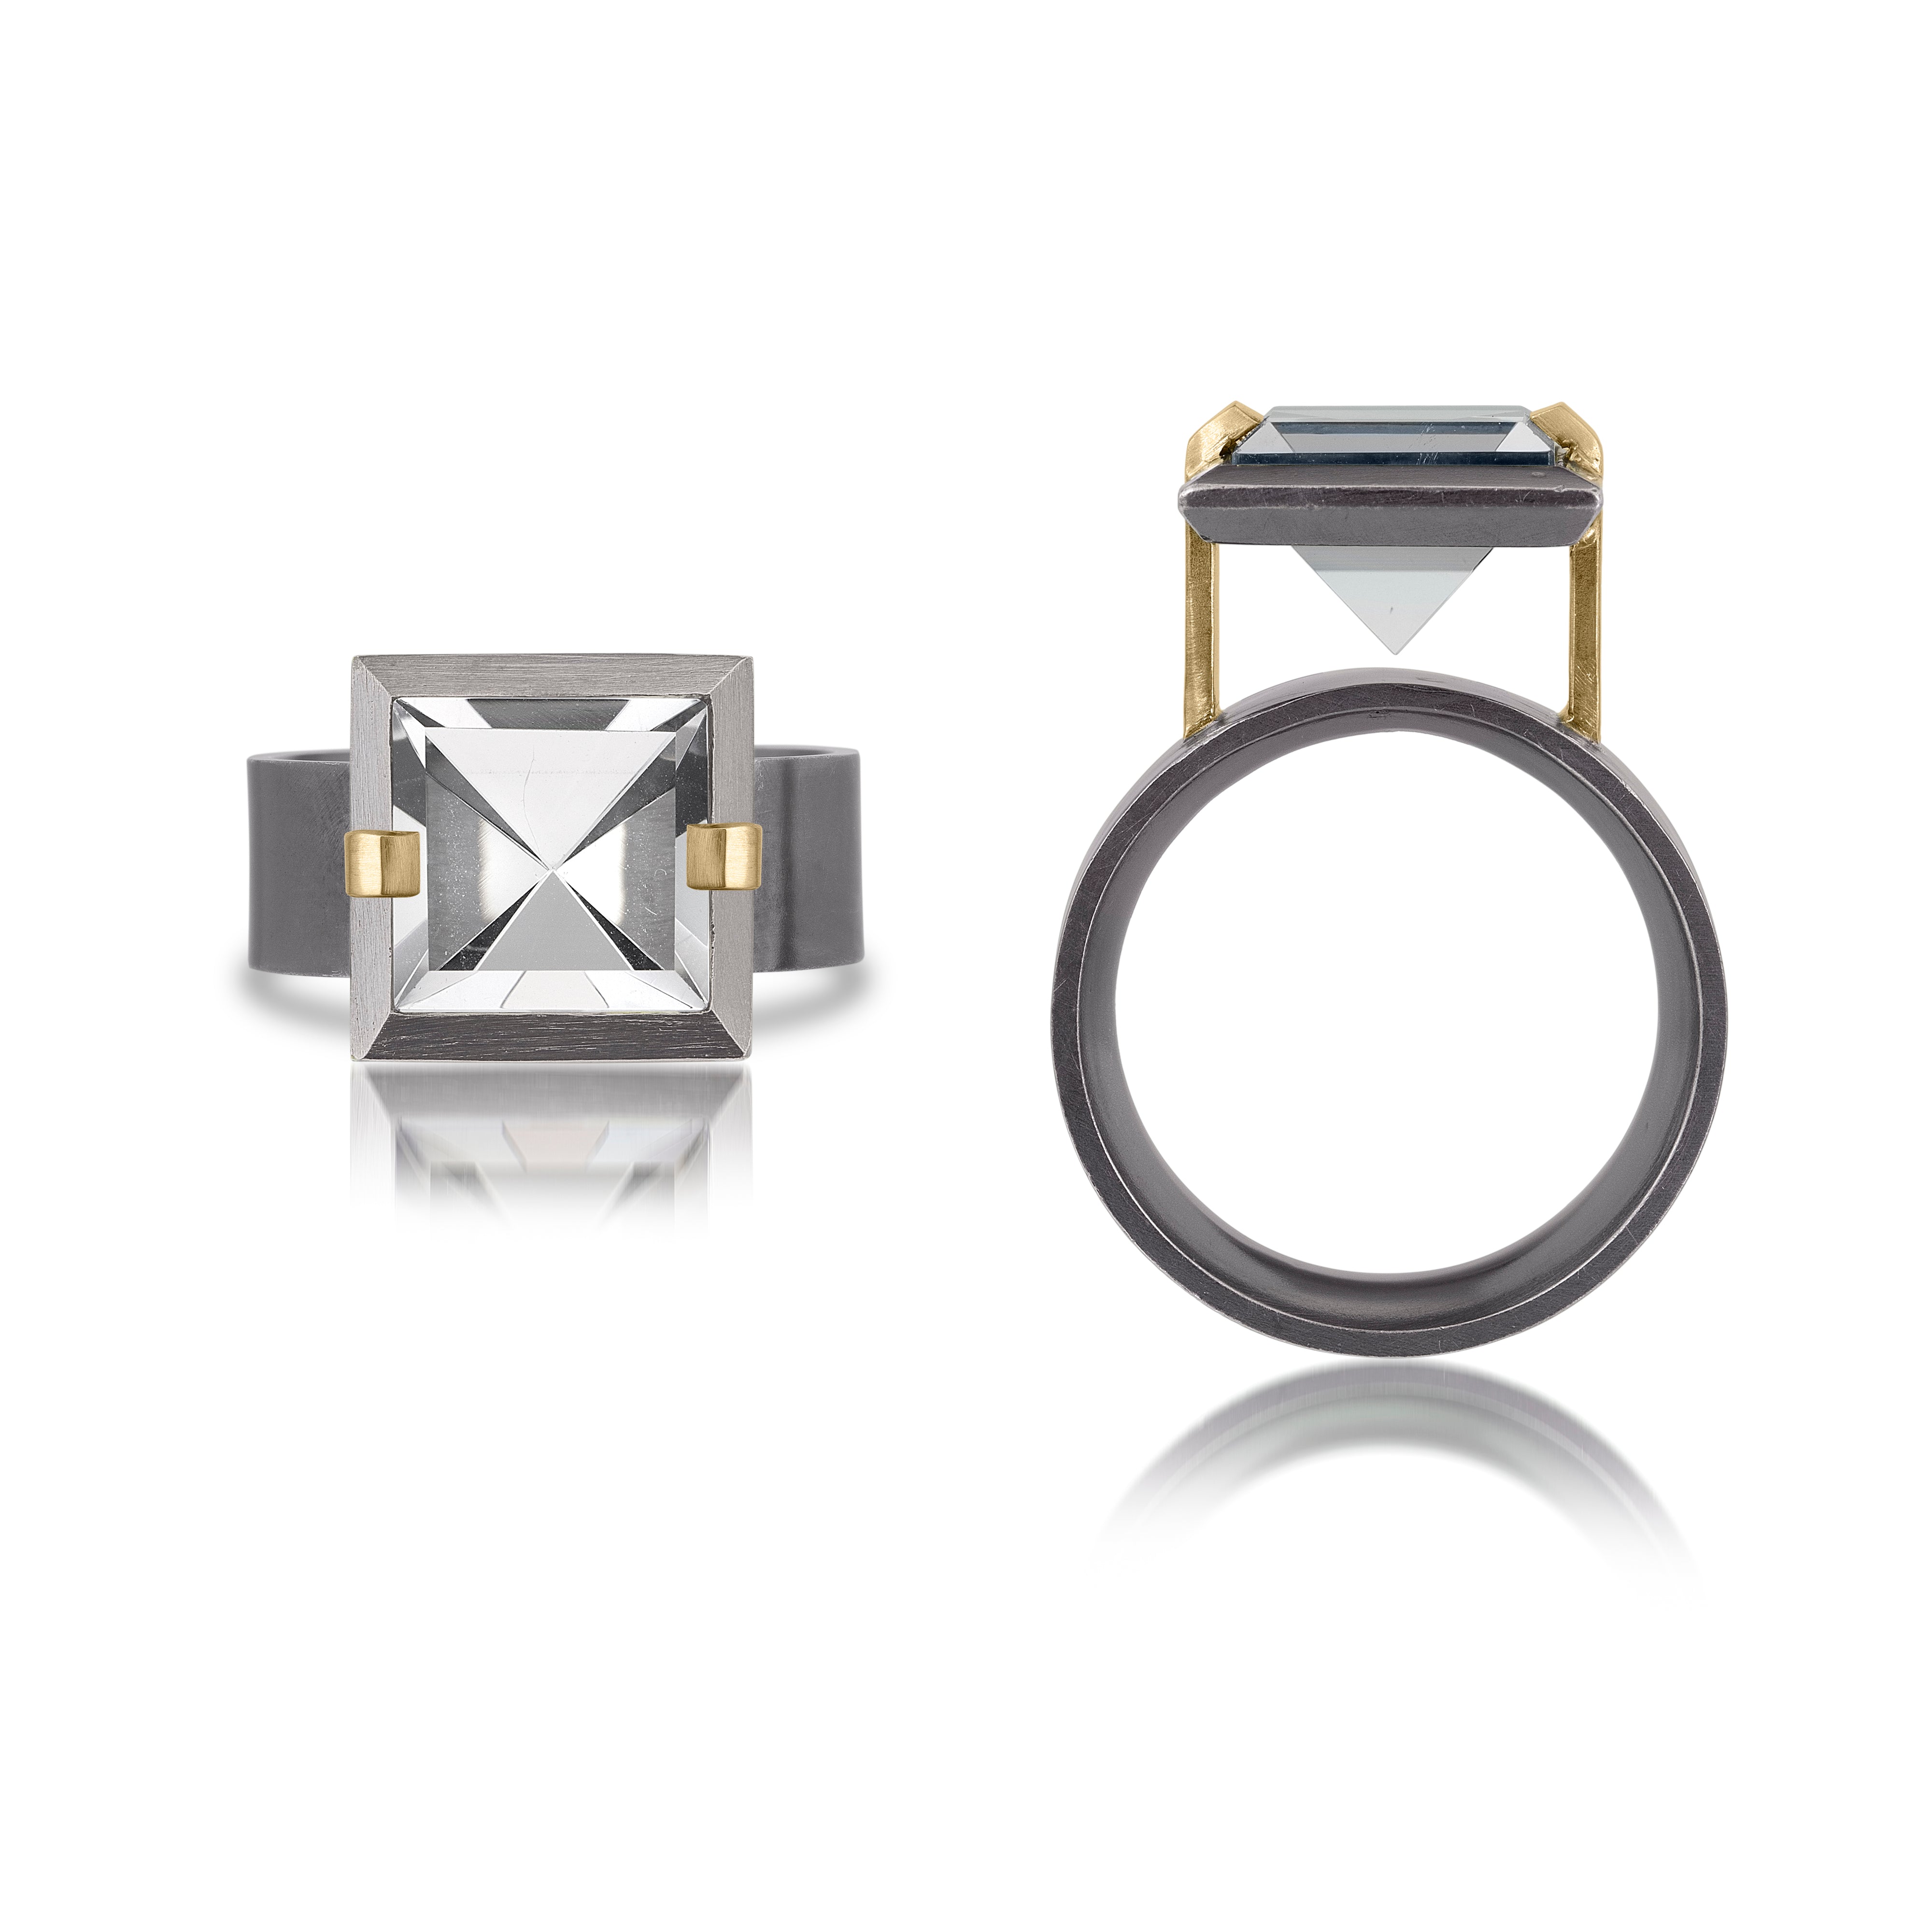 This small style Facets ring is natural gemstone set in oxidized sterling and 18k gold. Crisp and sparkling faceted squares of gemstone are elevated and framed in oxidized silver accented with 18k gold prongs.  The ring features an oxidized sterling comfort band.  Gemstone 3.26- 3.76 tcw.